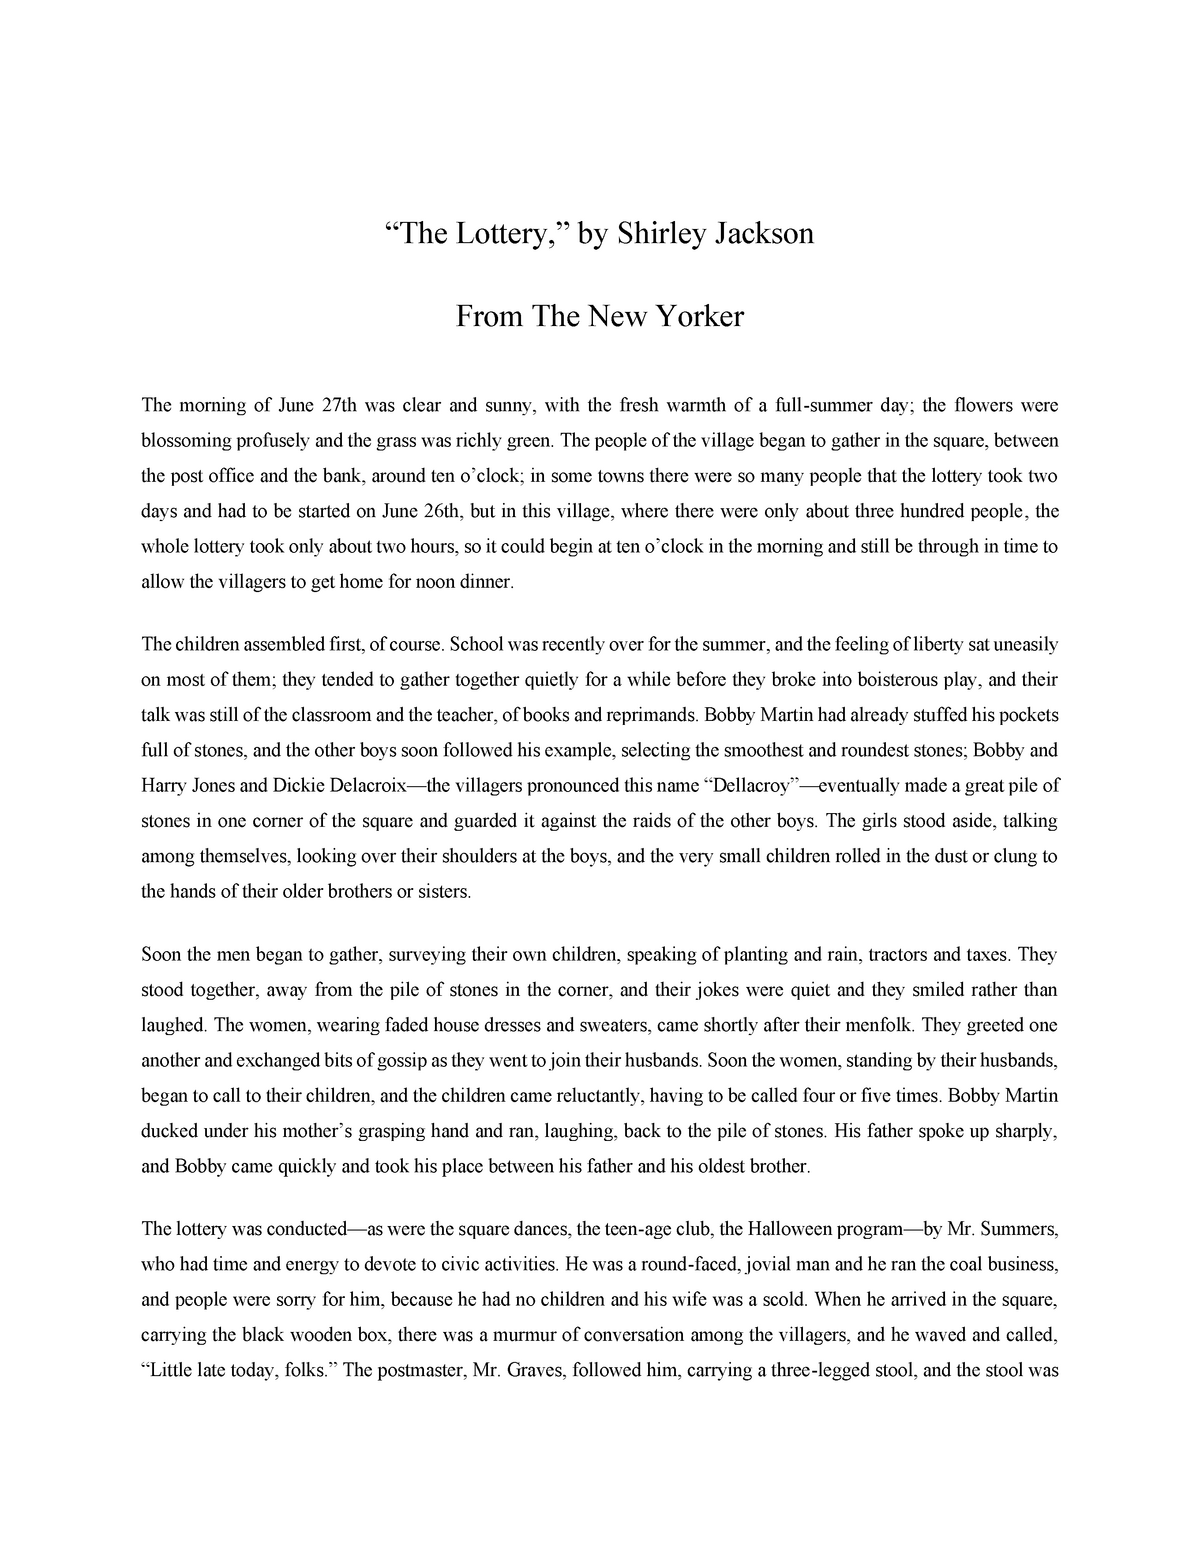 thesis statement for the lottery by shirley jackson